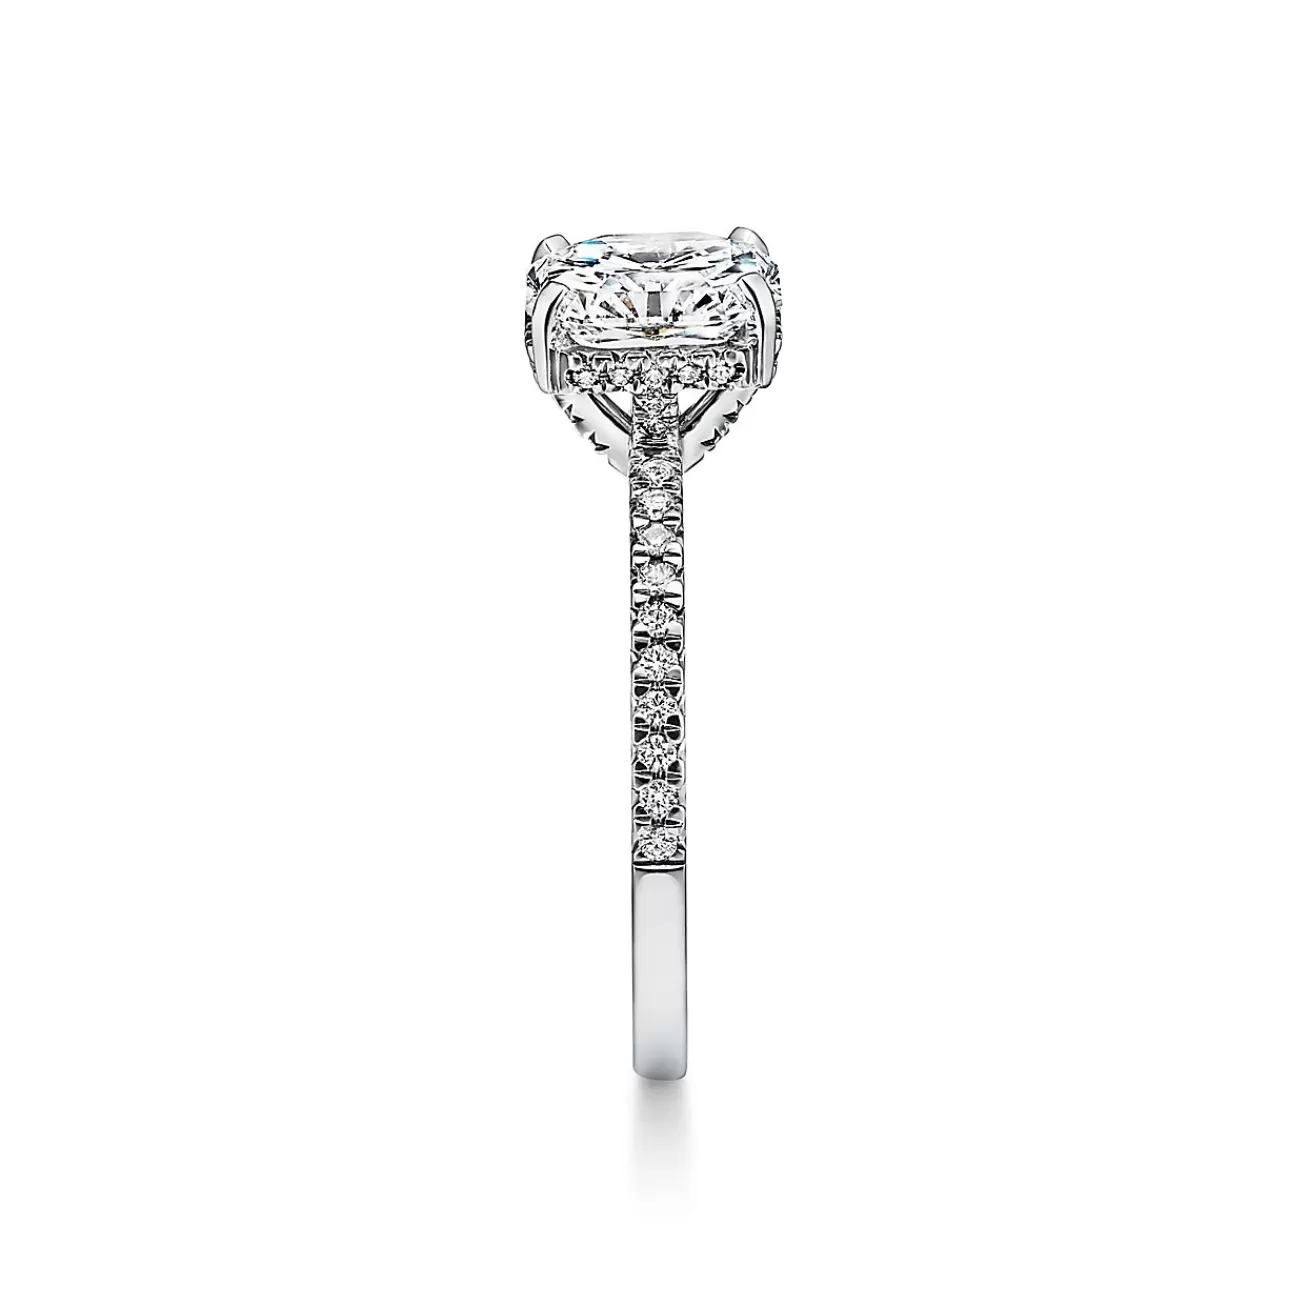 Tiffany & Co. Tiffany True® engagement ring in platinum: an icon of modern love. | ^ Engagement Rings